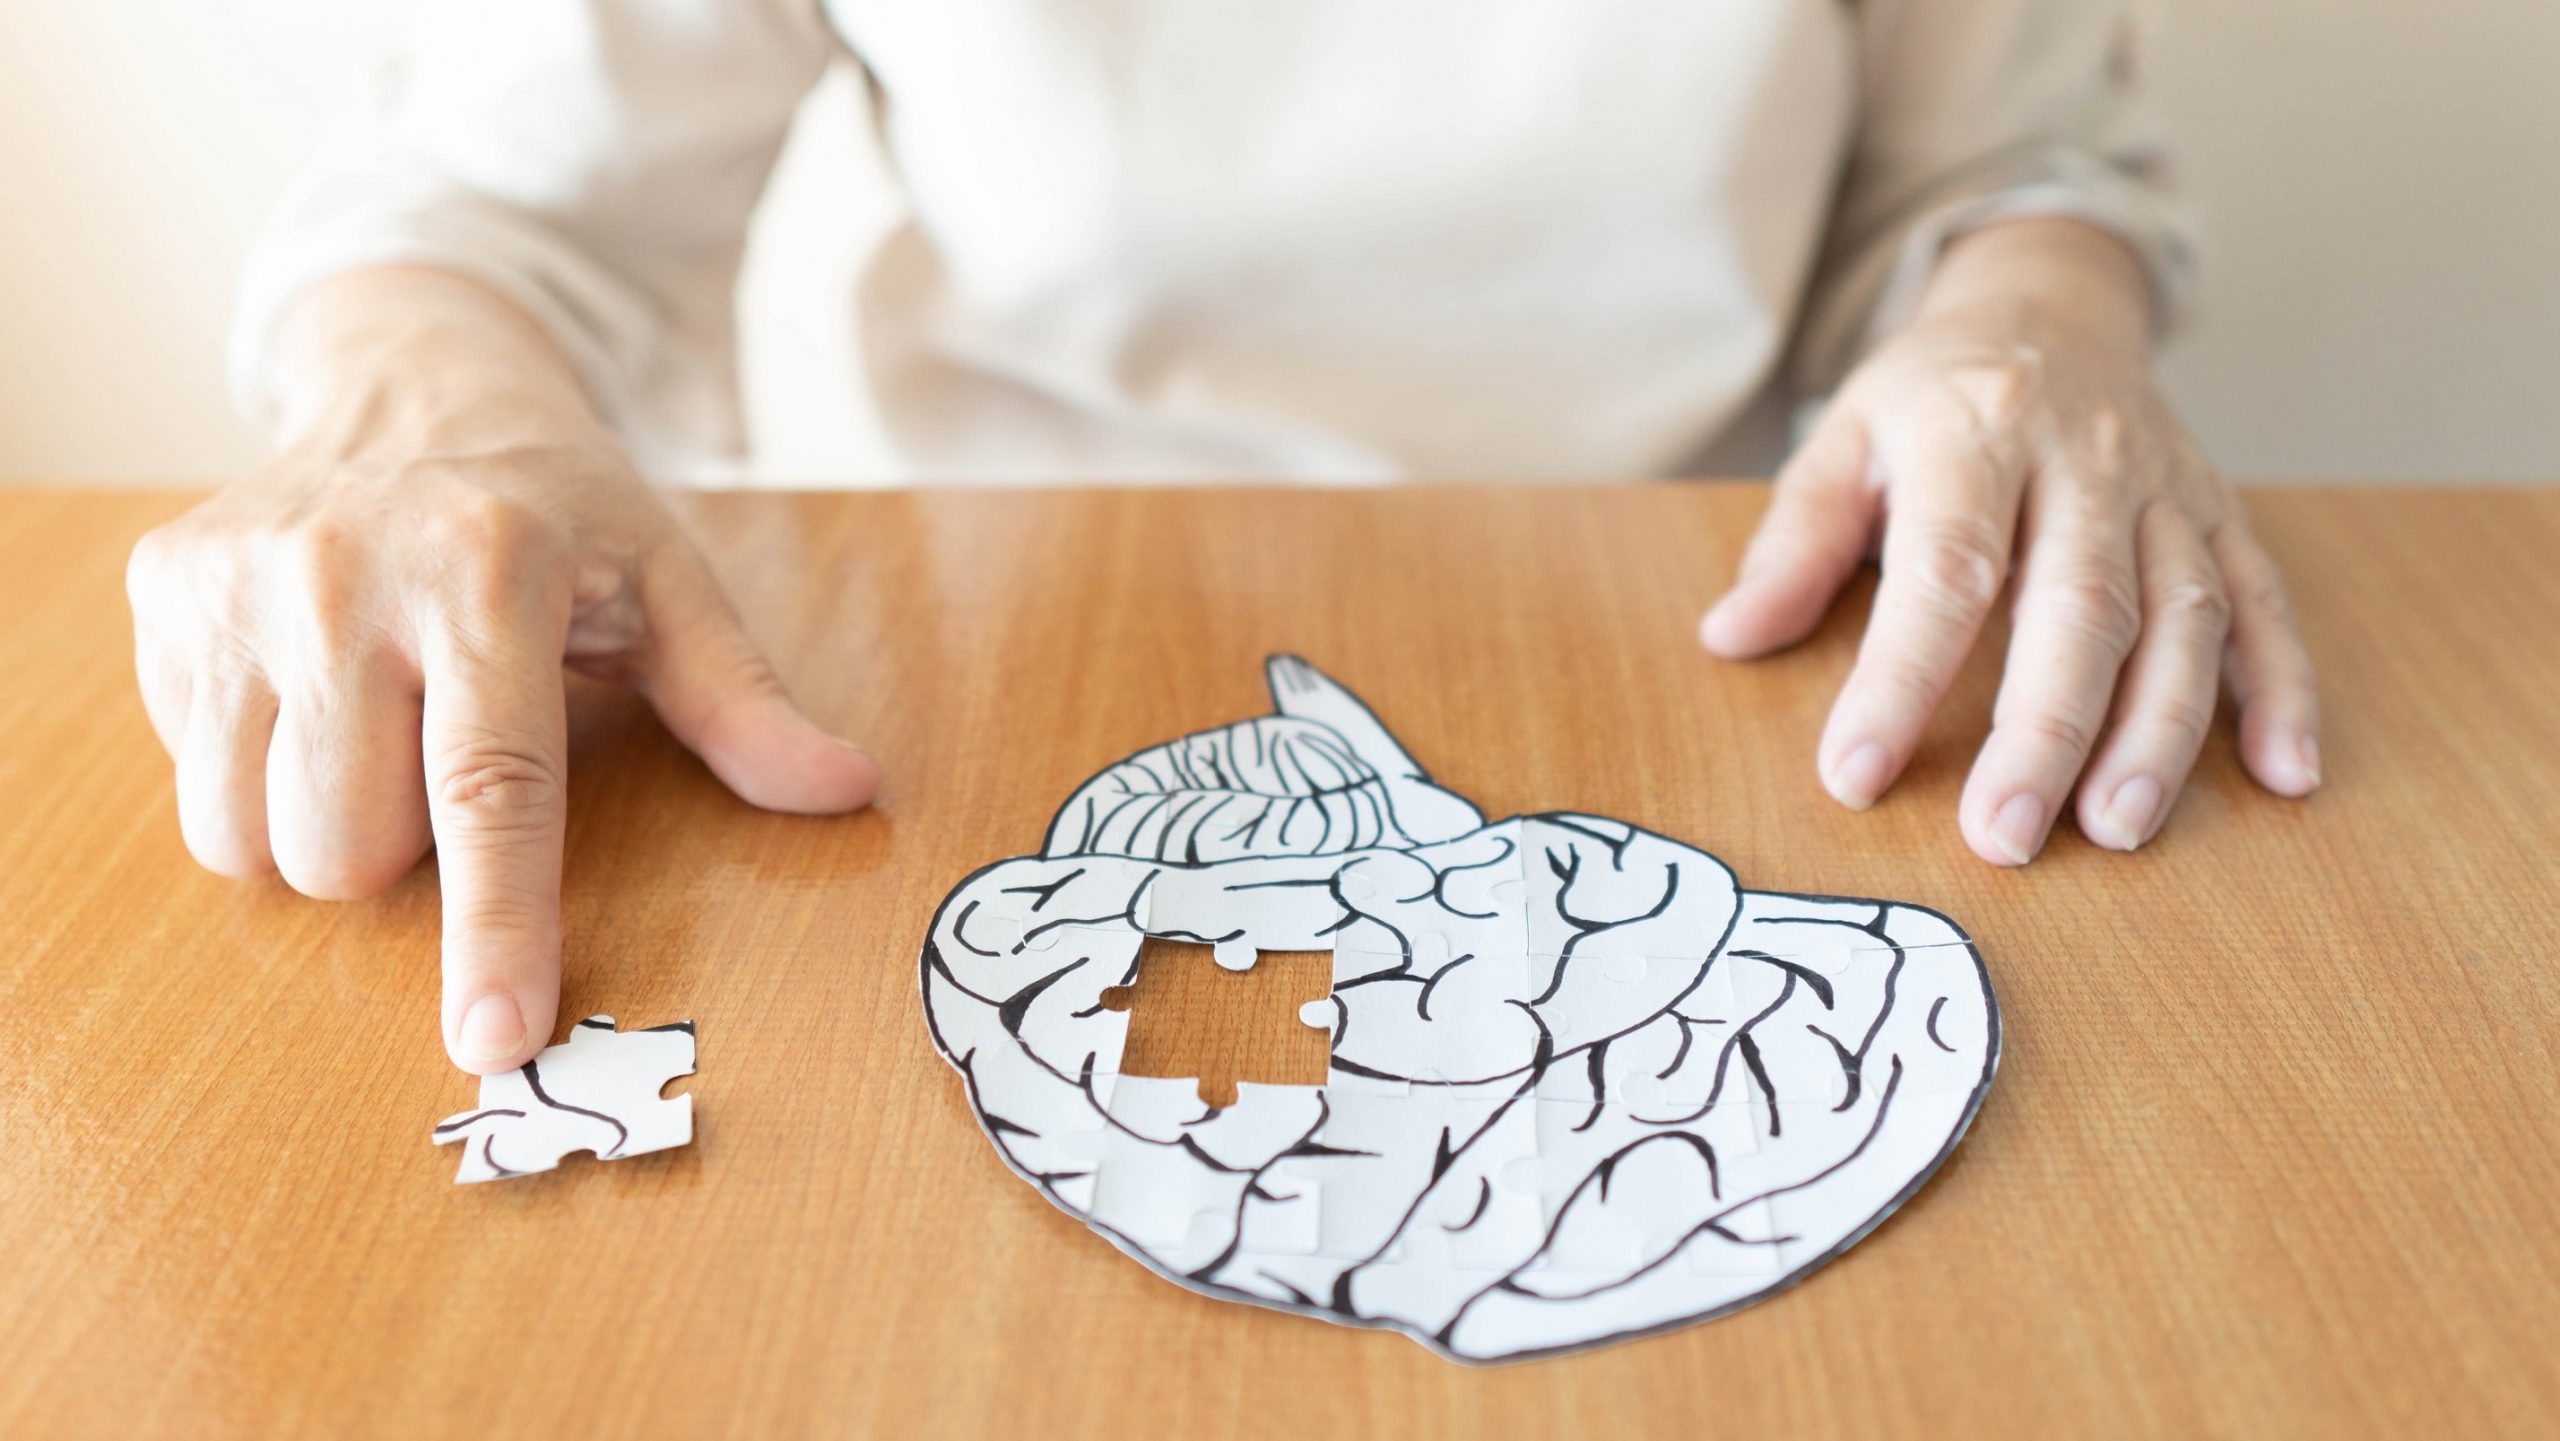 Woman doing a jigsaw puzzle of a brain